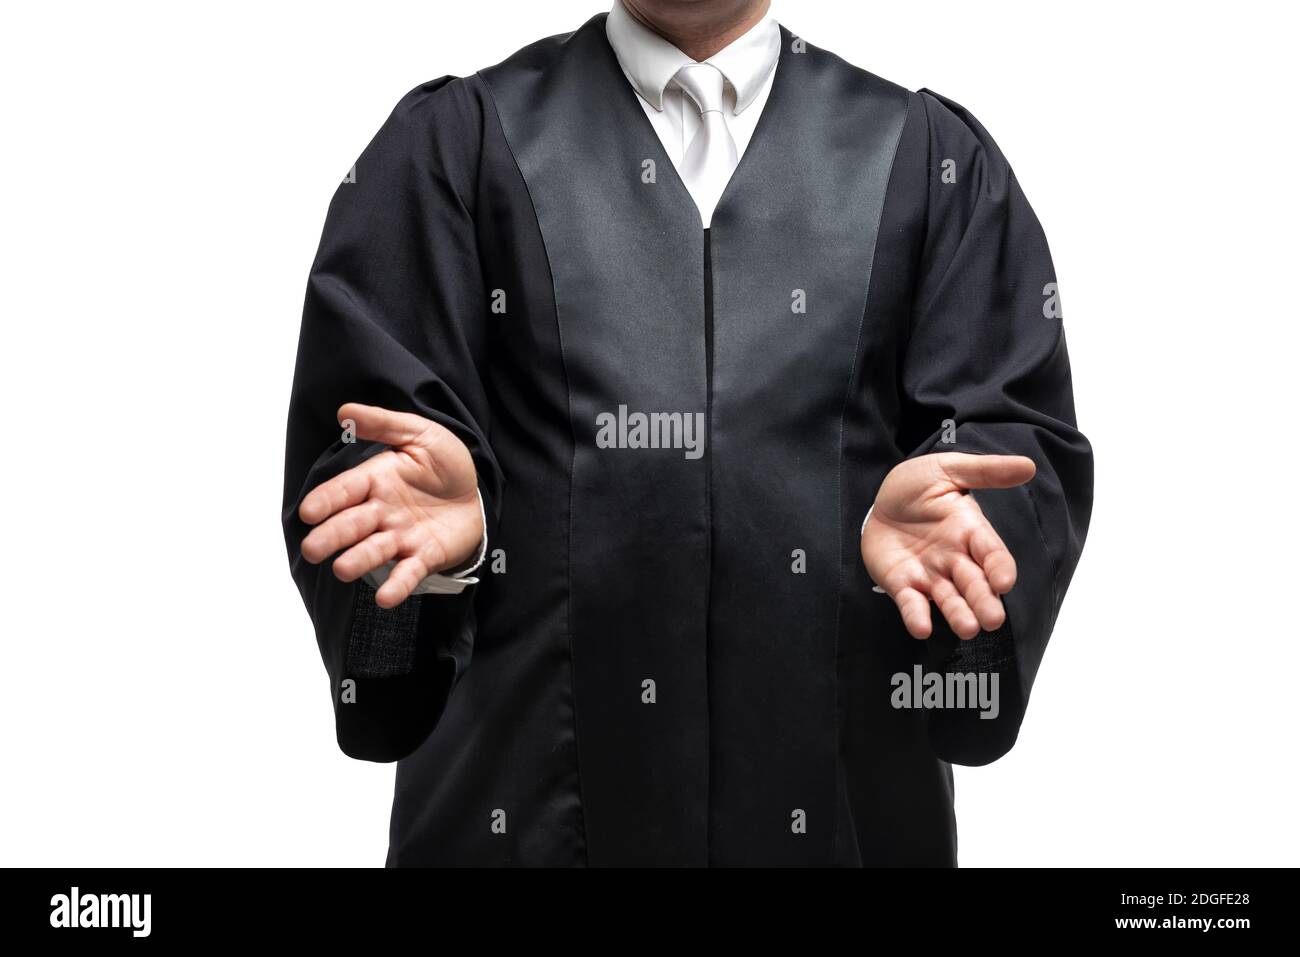 German lawyer with a robe Stock Photo